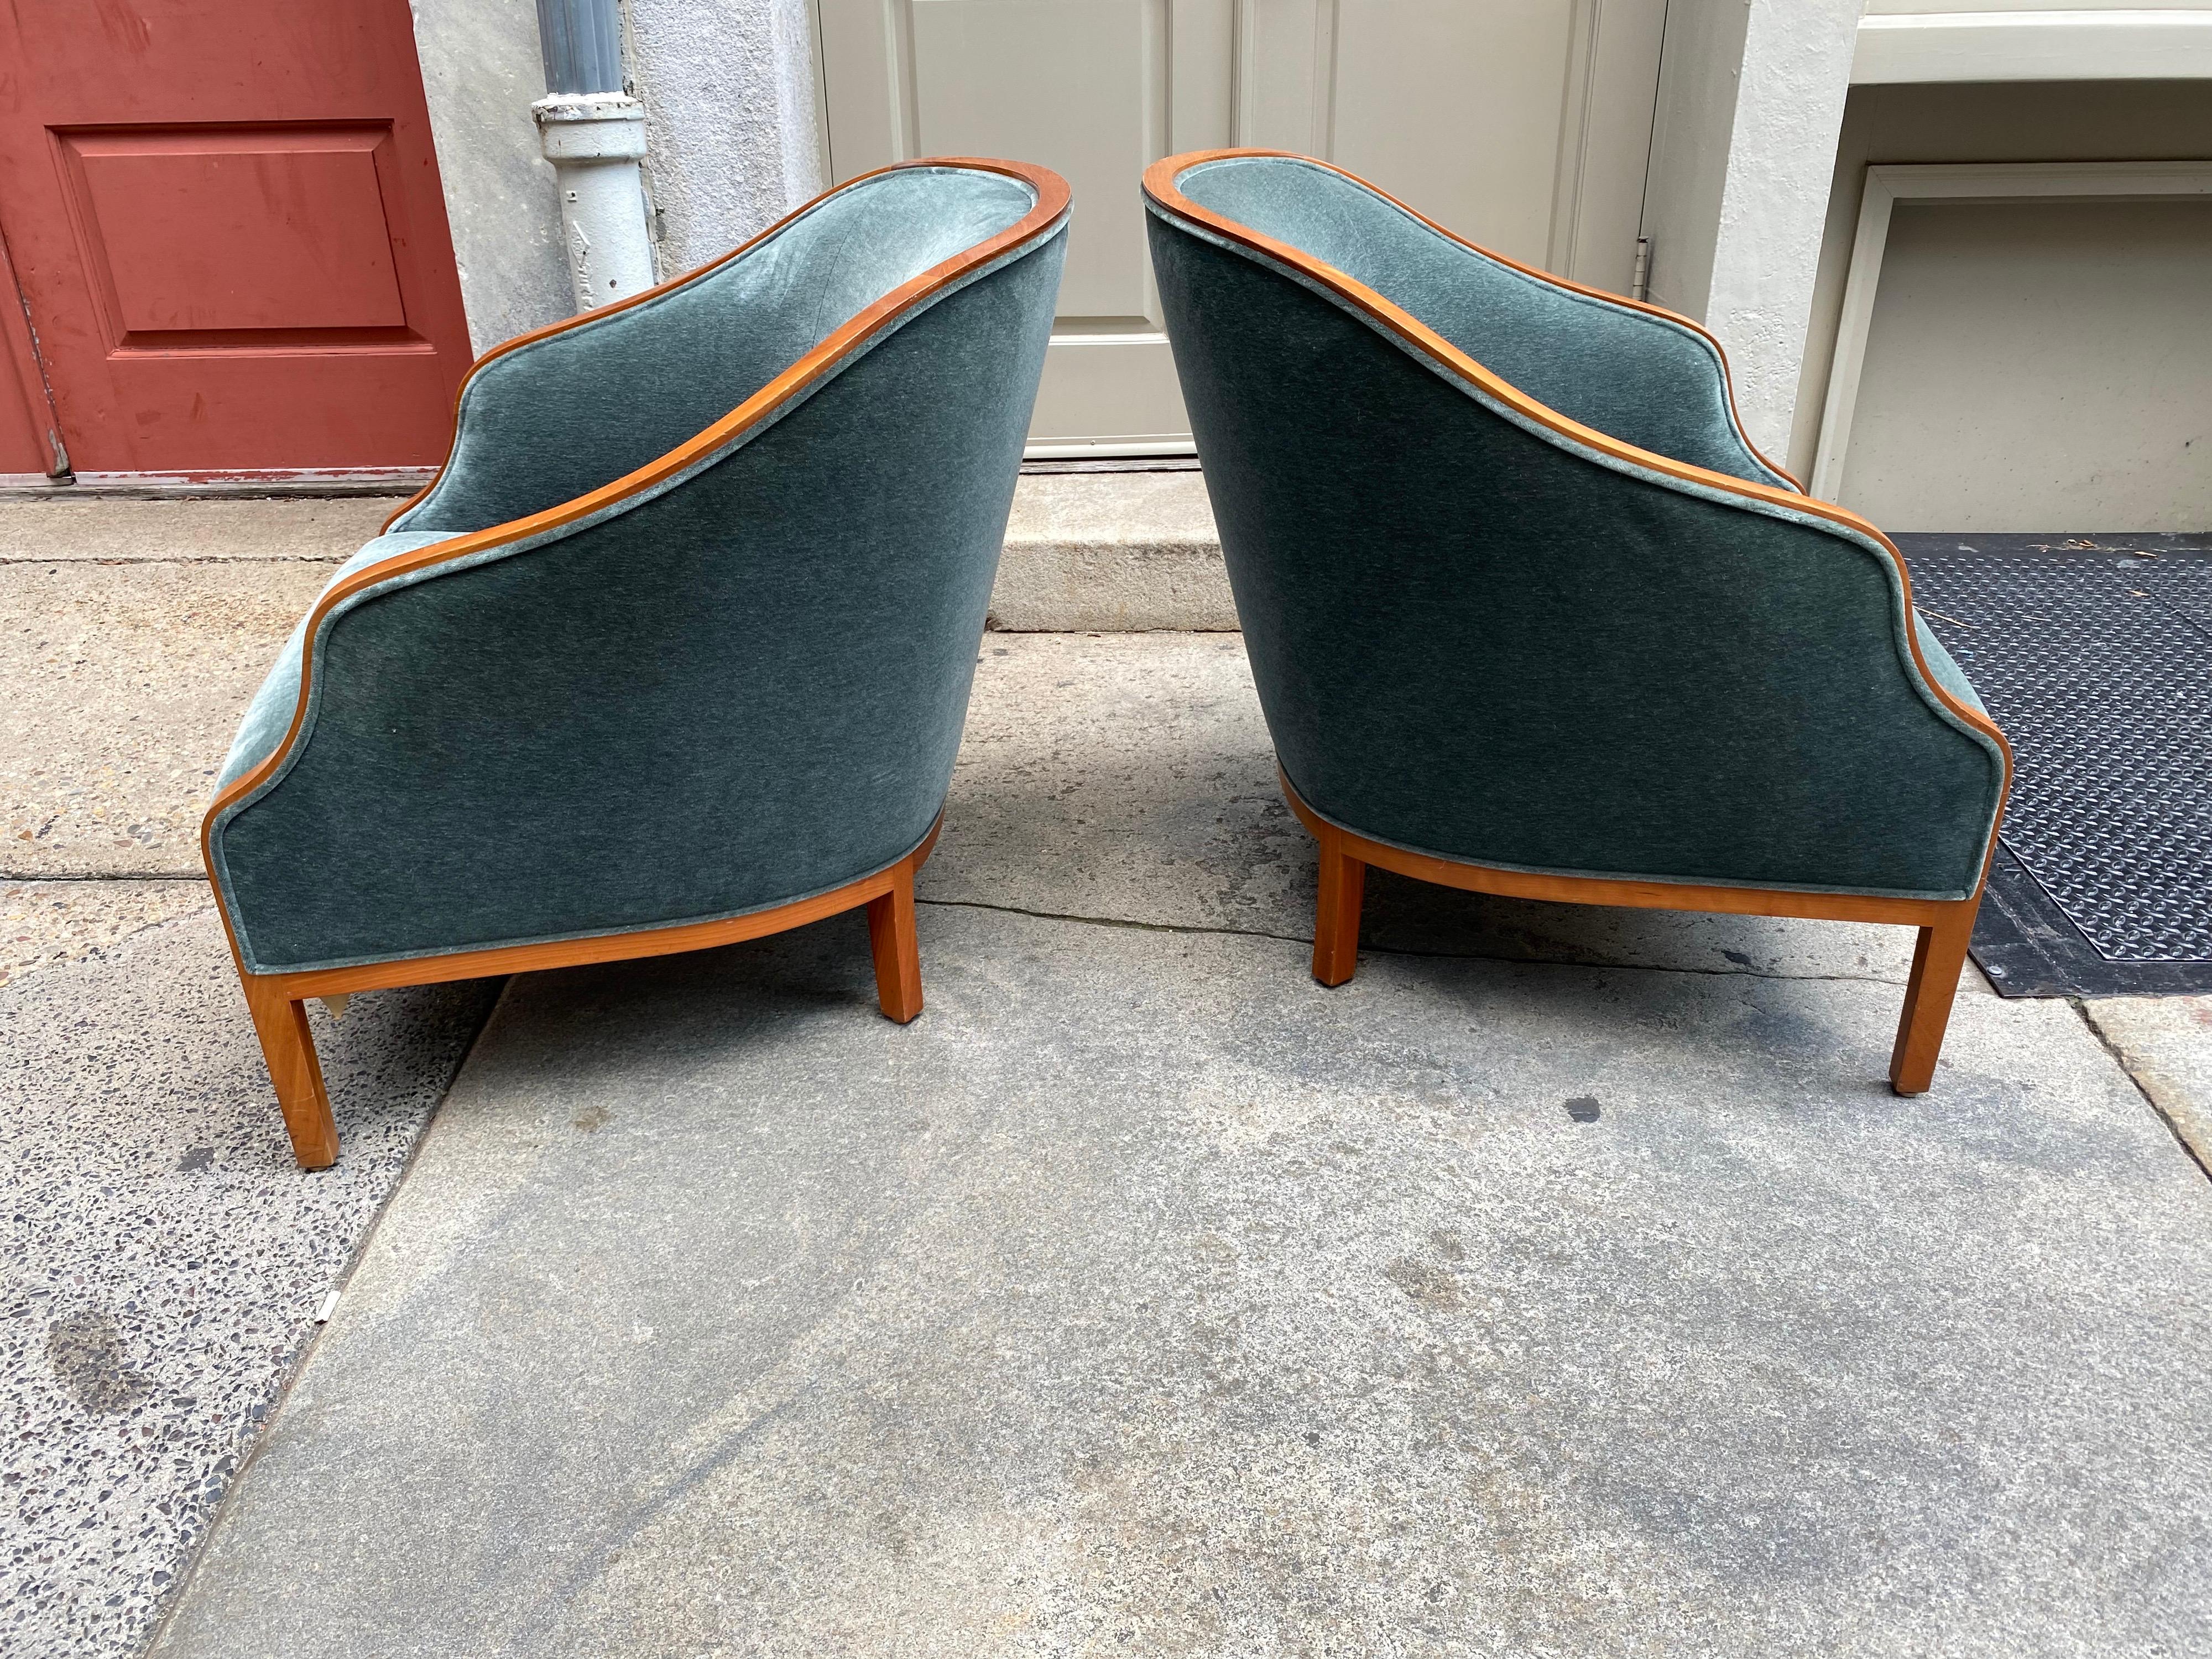 Ward Bennett for Brickel Associates pair of graceful lounge chairs, with cherry wood arms and legs and a blue gray mohair. Chairs are all Original, dated 1988, although this is a 1960's design. Mohair still presents very well, shows typical signs of